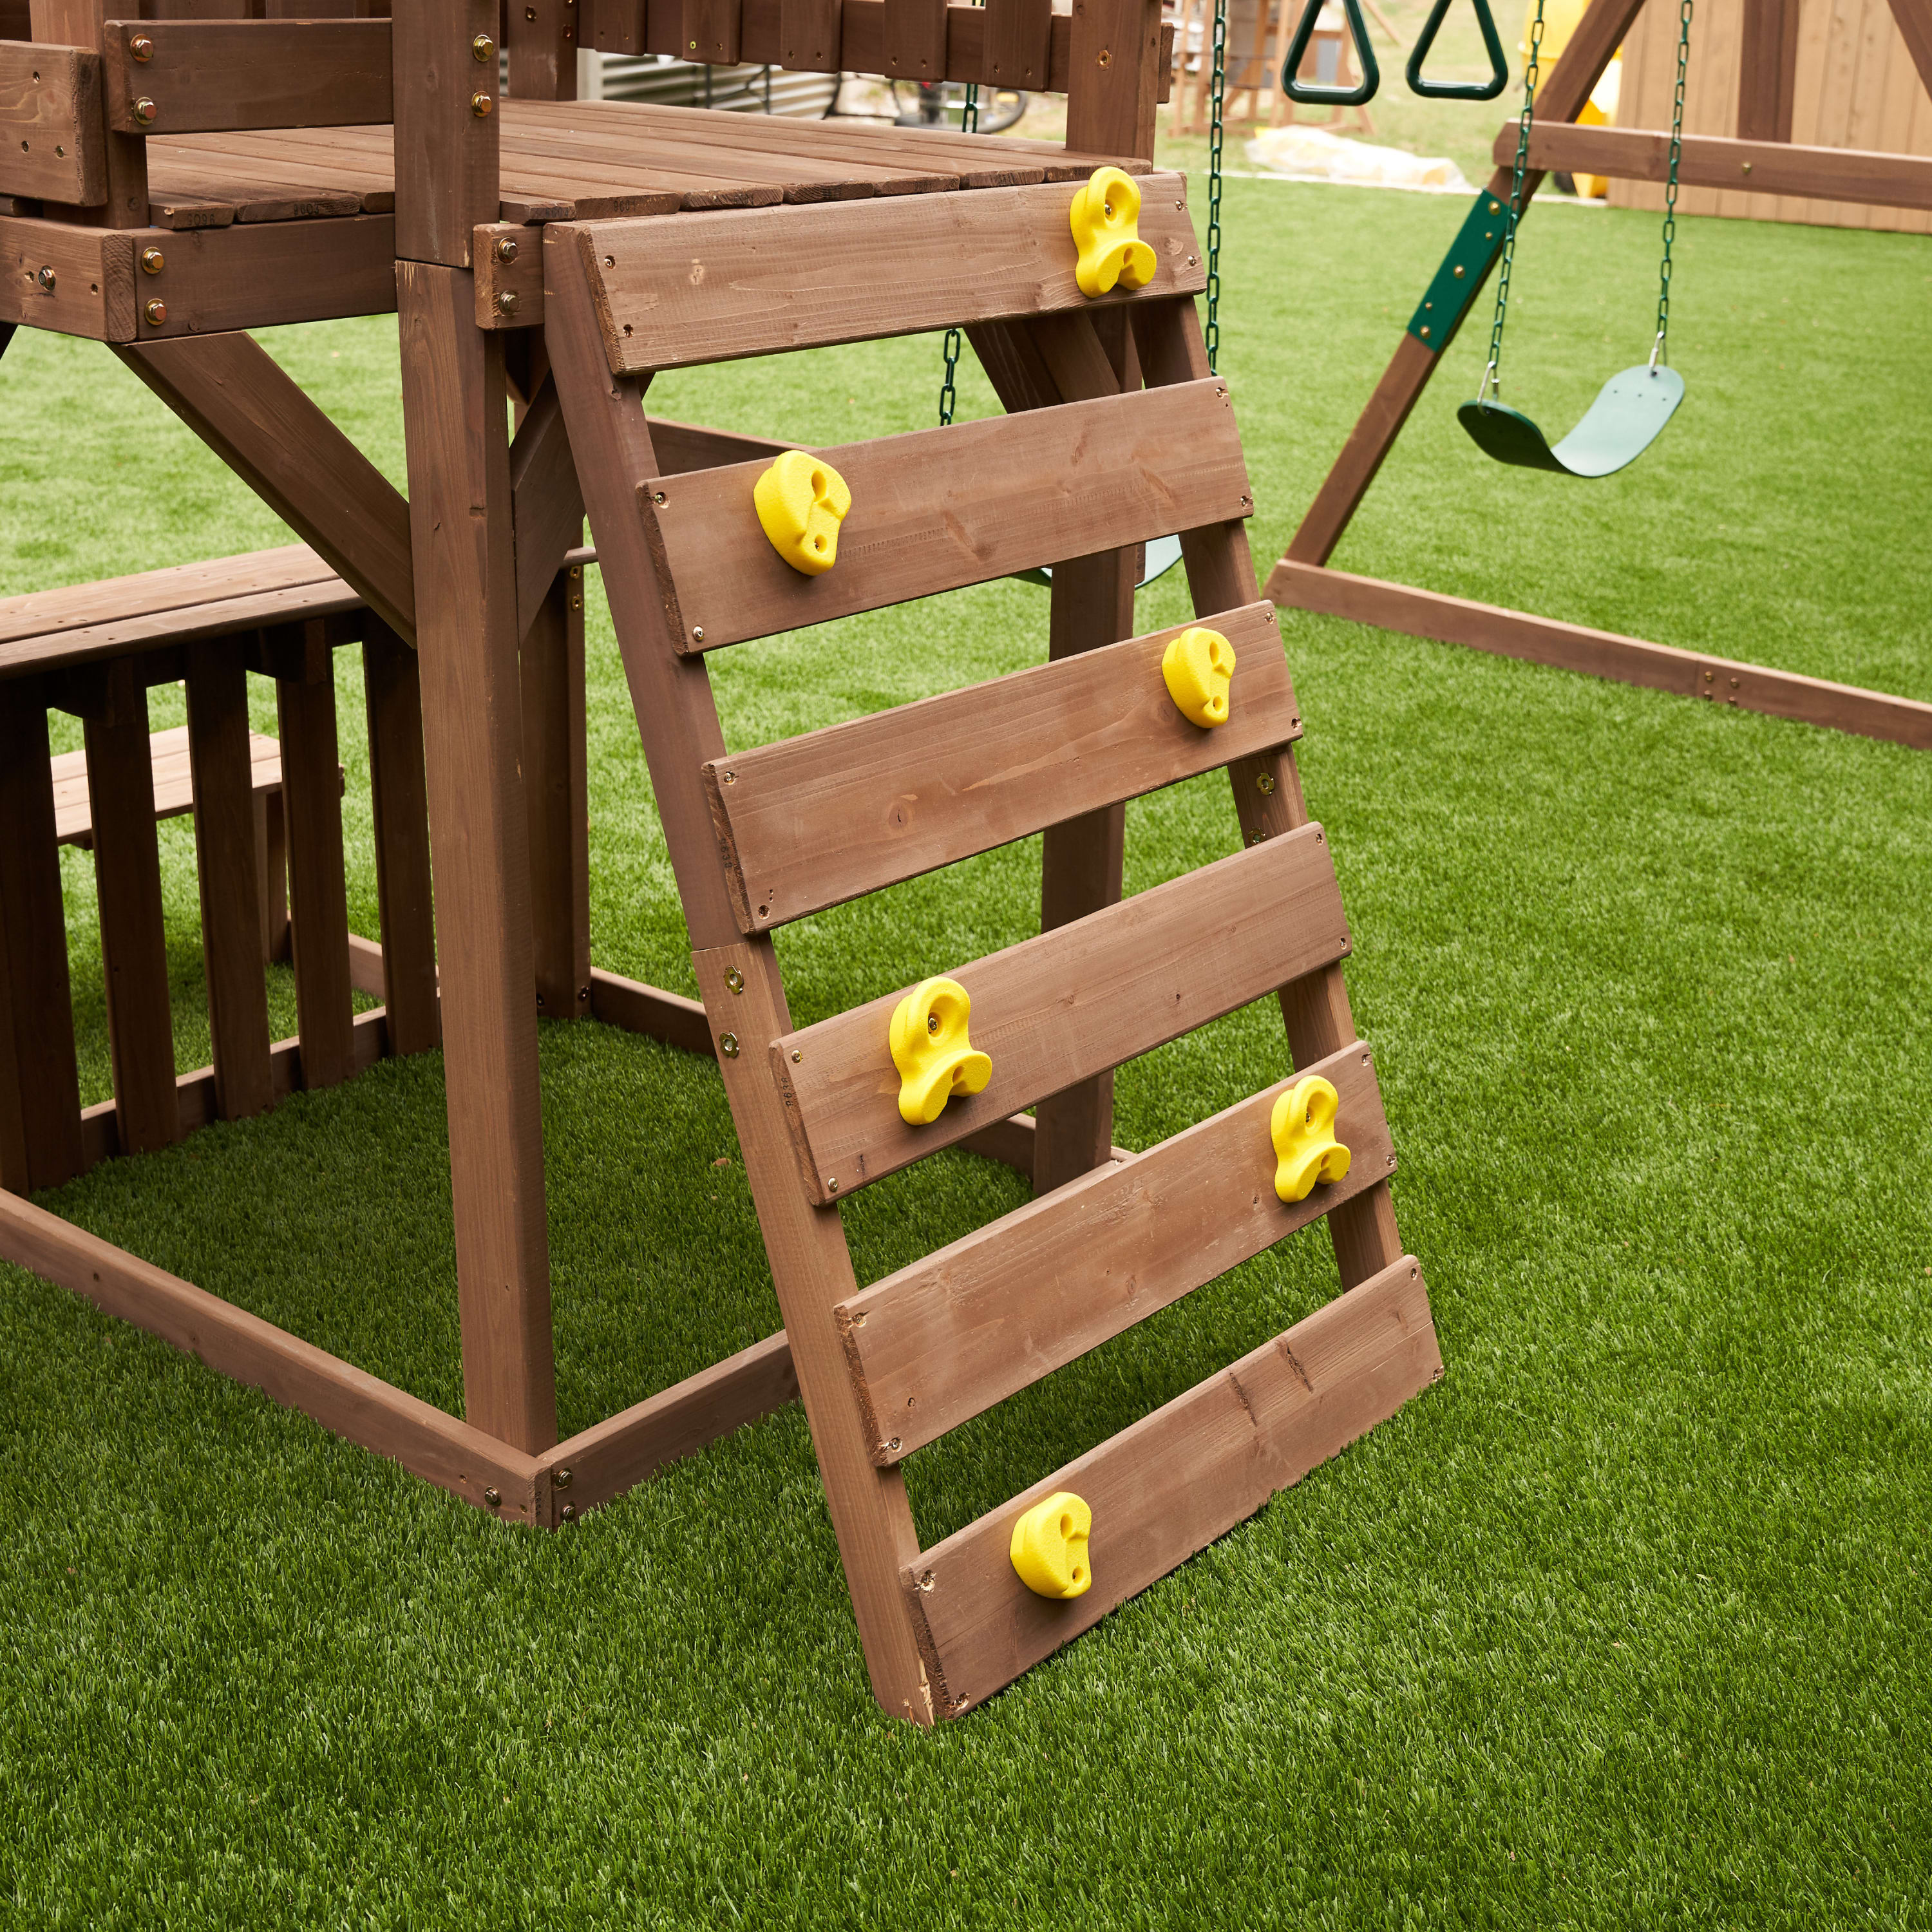 KidKraft Arbor Crest Wooden Swing Set / Playset with Table and Bench - image 4 of 11